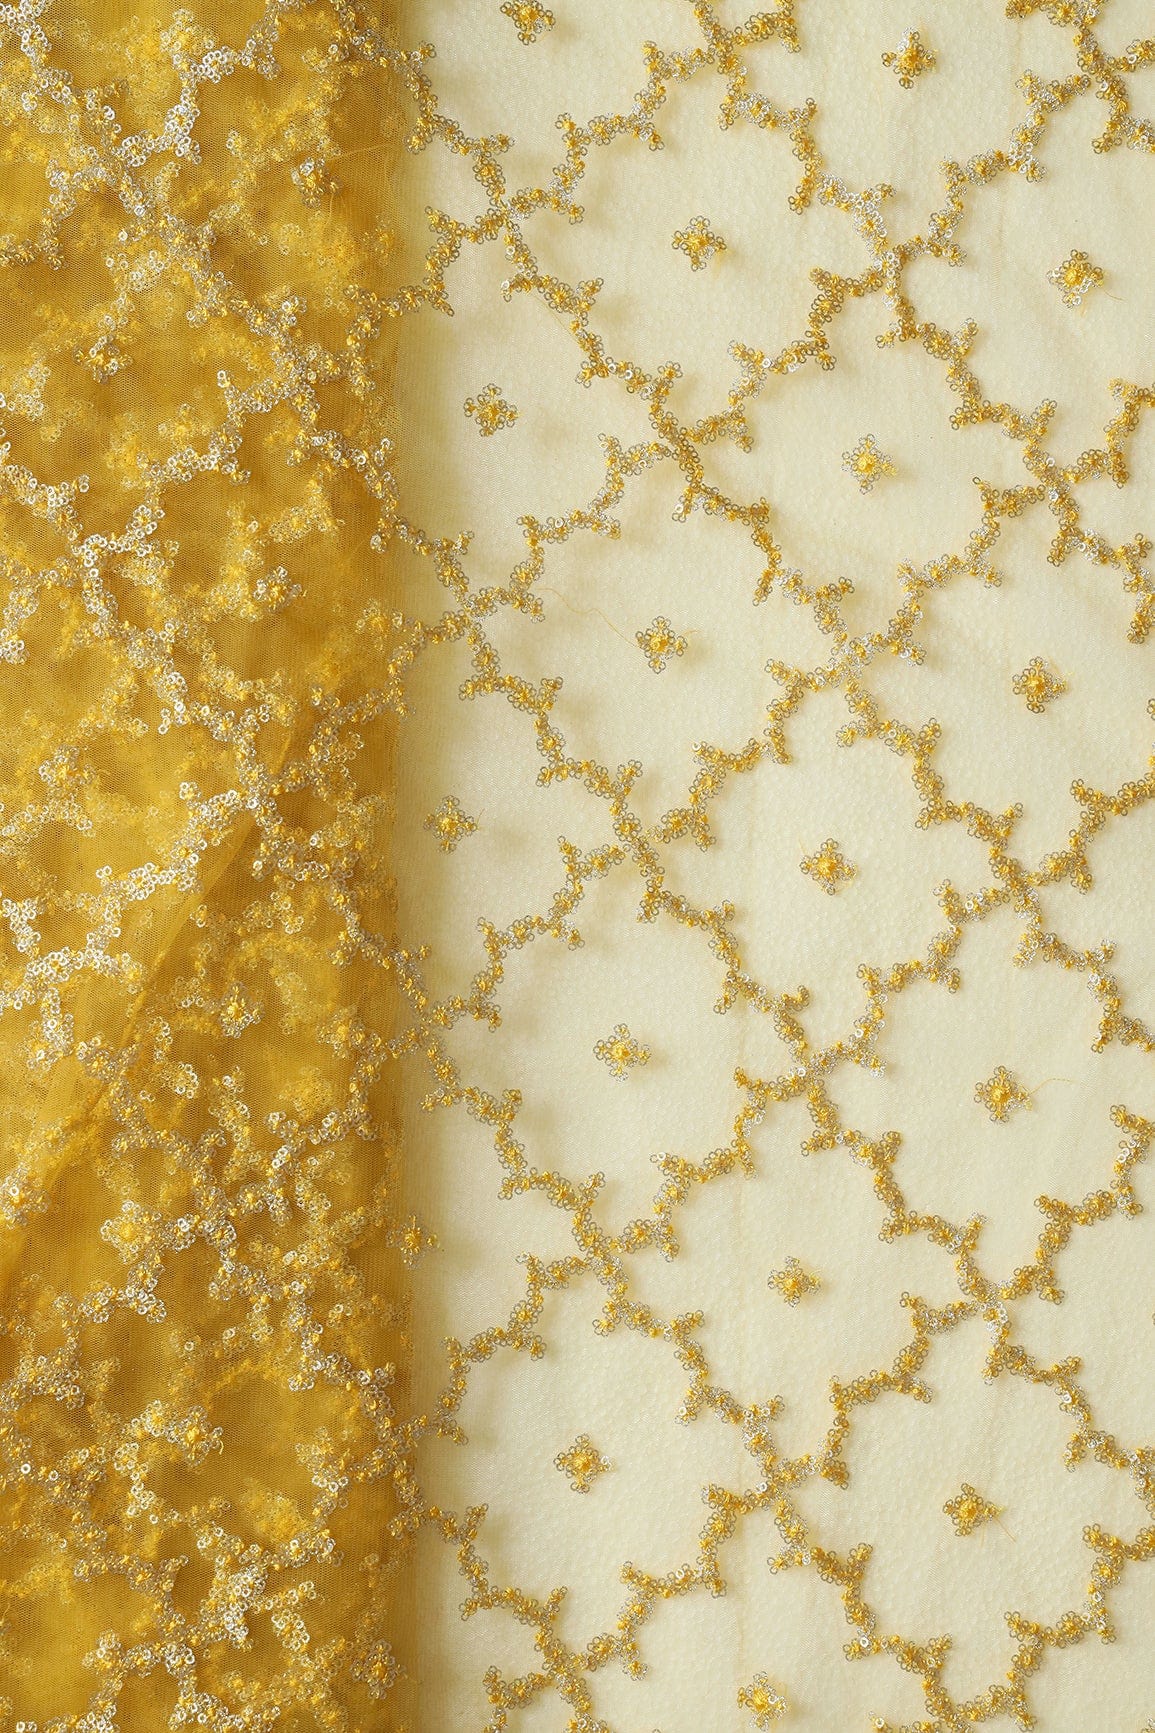 doeraa Embroidery Fabrics 4 Meter Cut Piece Of Glitter Sequins With Yellow Thread Geometric Embroidery On Yellow Soft Net